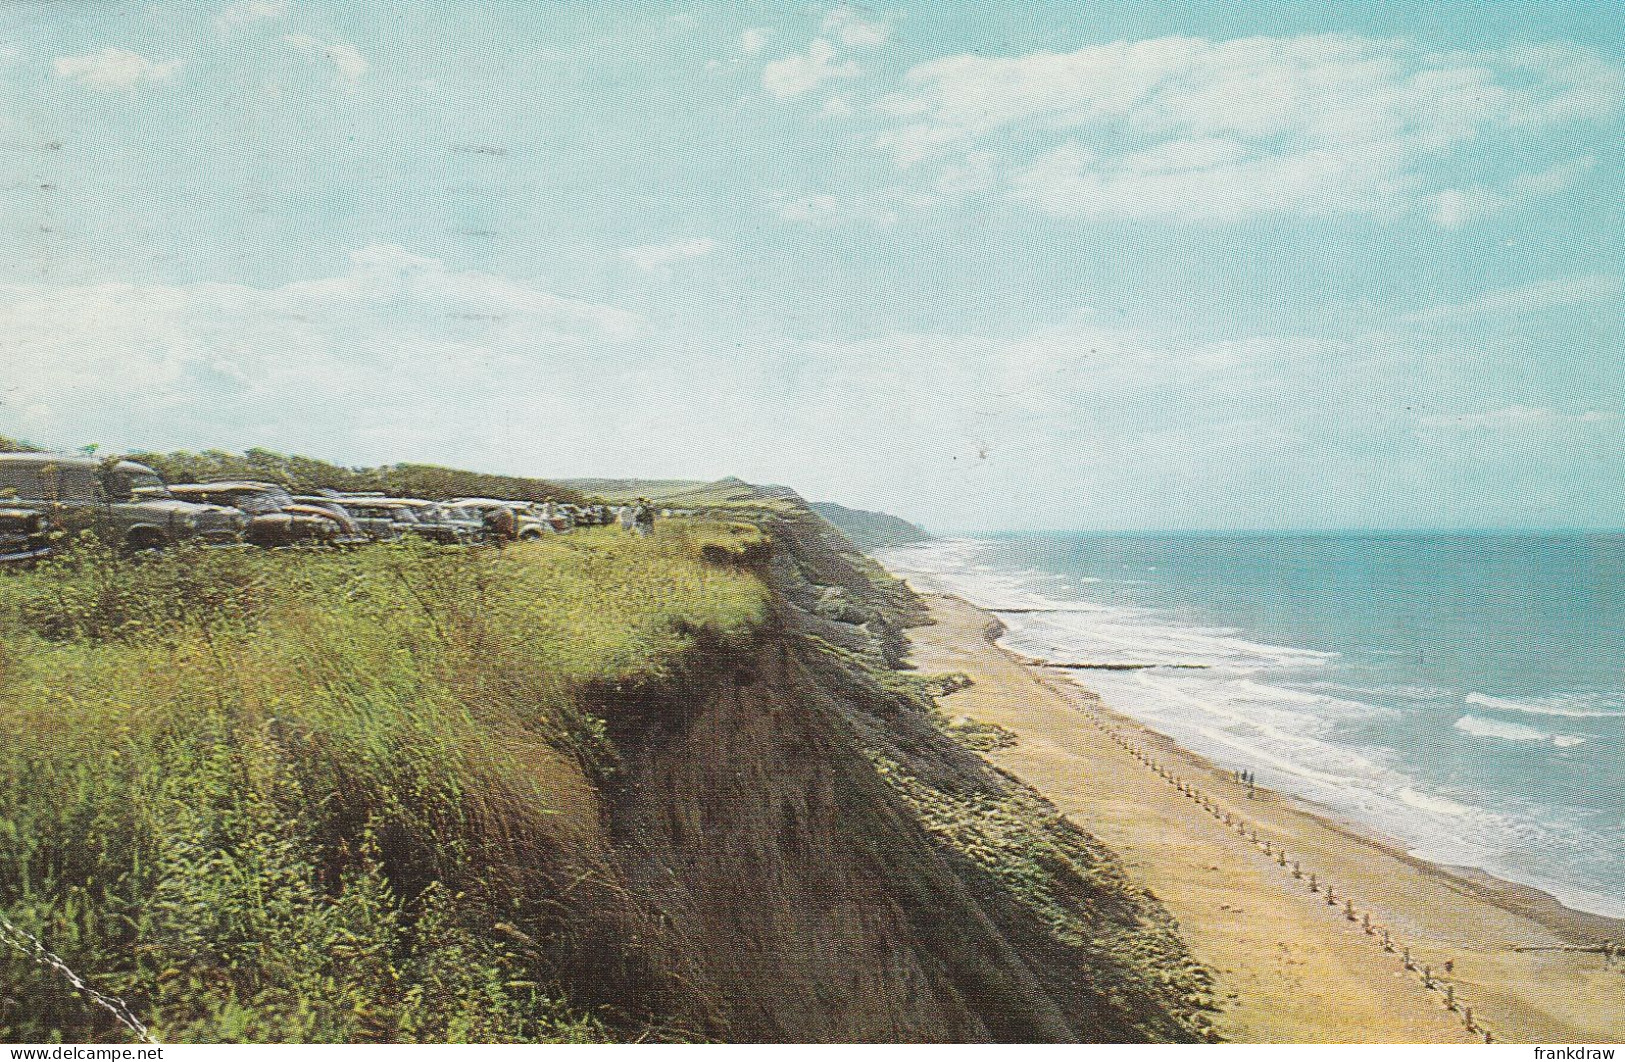 Postcard - West Cliff, Overstrand - Card No. 100000036a - Posted27th Aug1970 - Very Good - Unclassified